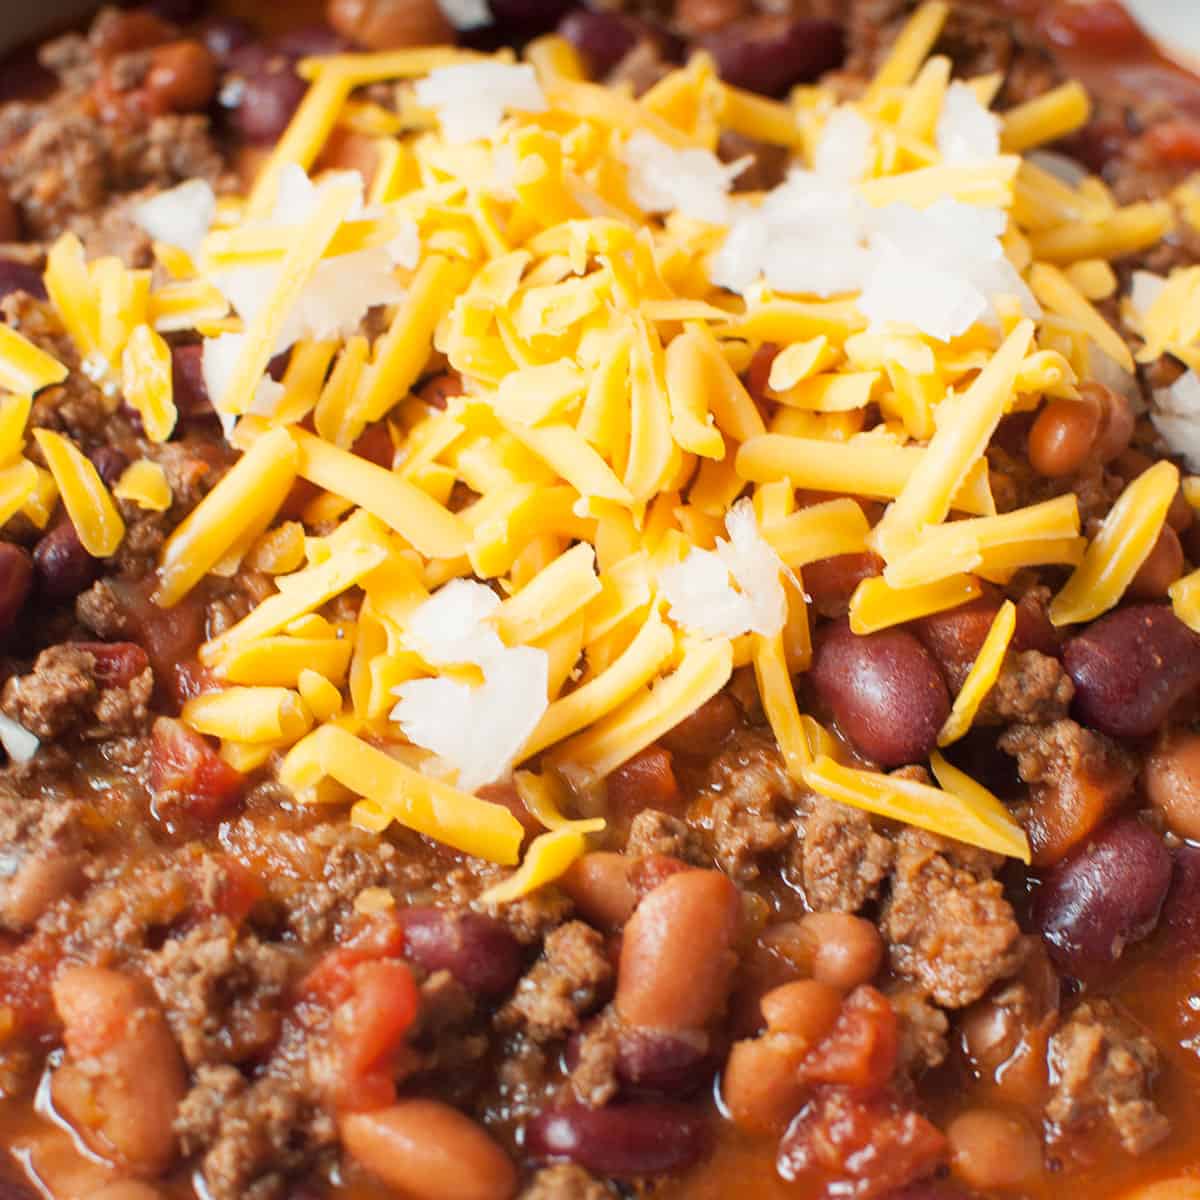 Upclose photo of bison chili wth cheese and onions on top of it.